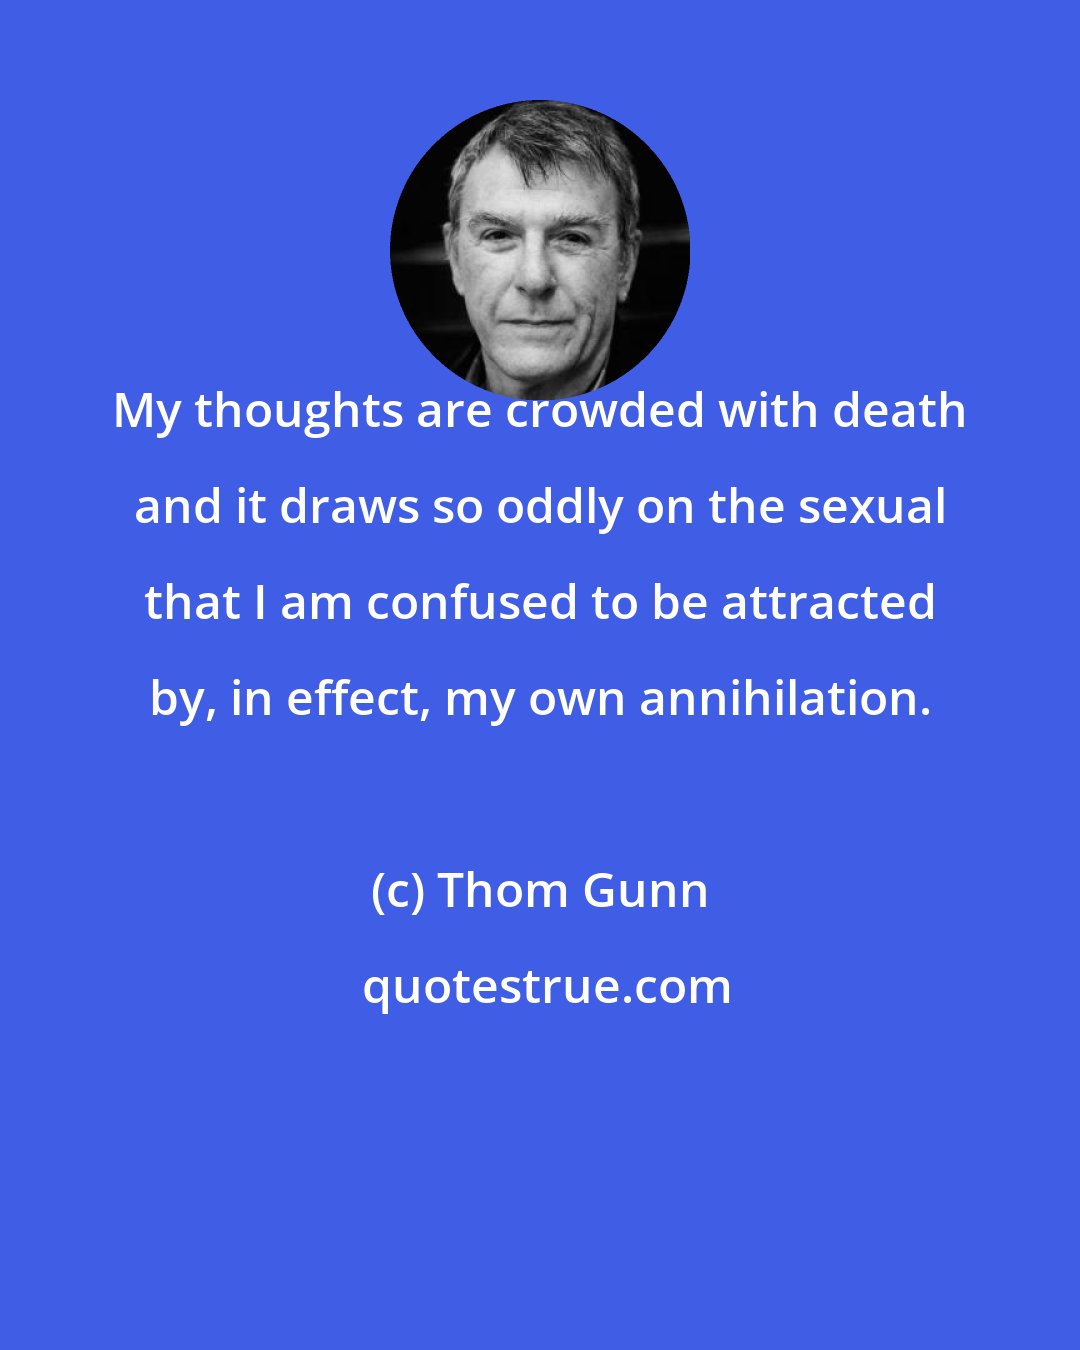 Thom Gunn: My thoughts are crowded with death and it draws so oddly on the sexual that I am confused to be attracted by, in effect, my own annihilation.